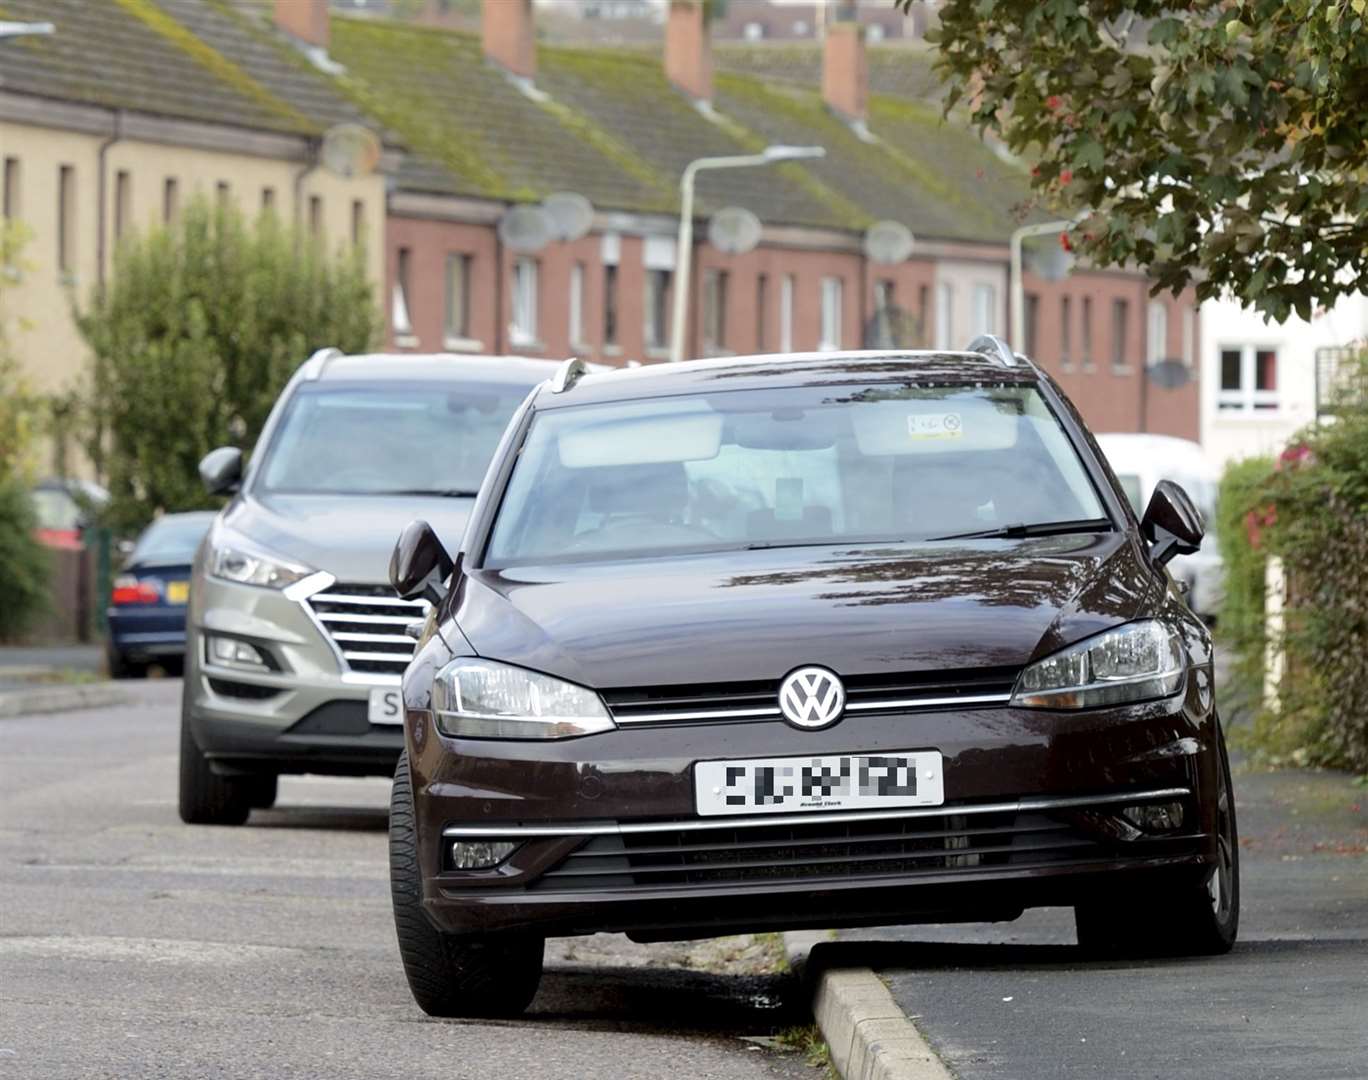 Local authorities will be given powers to tackle parking misdemeanours.